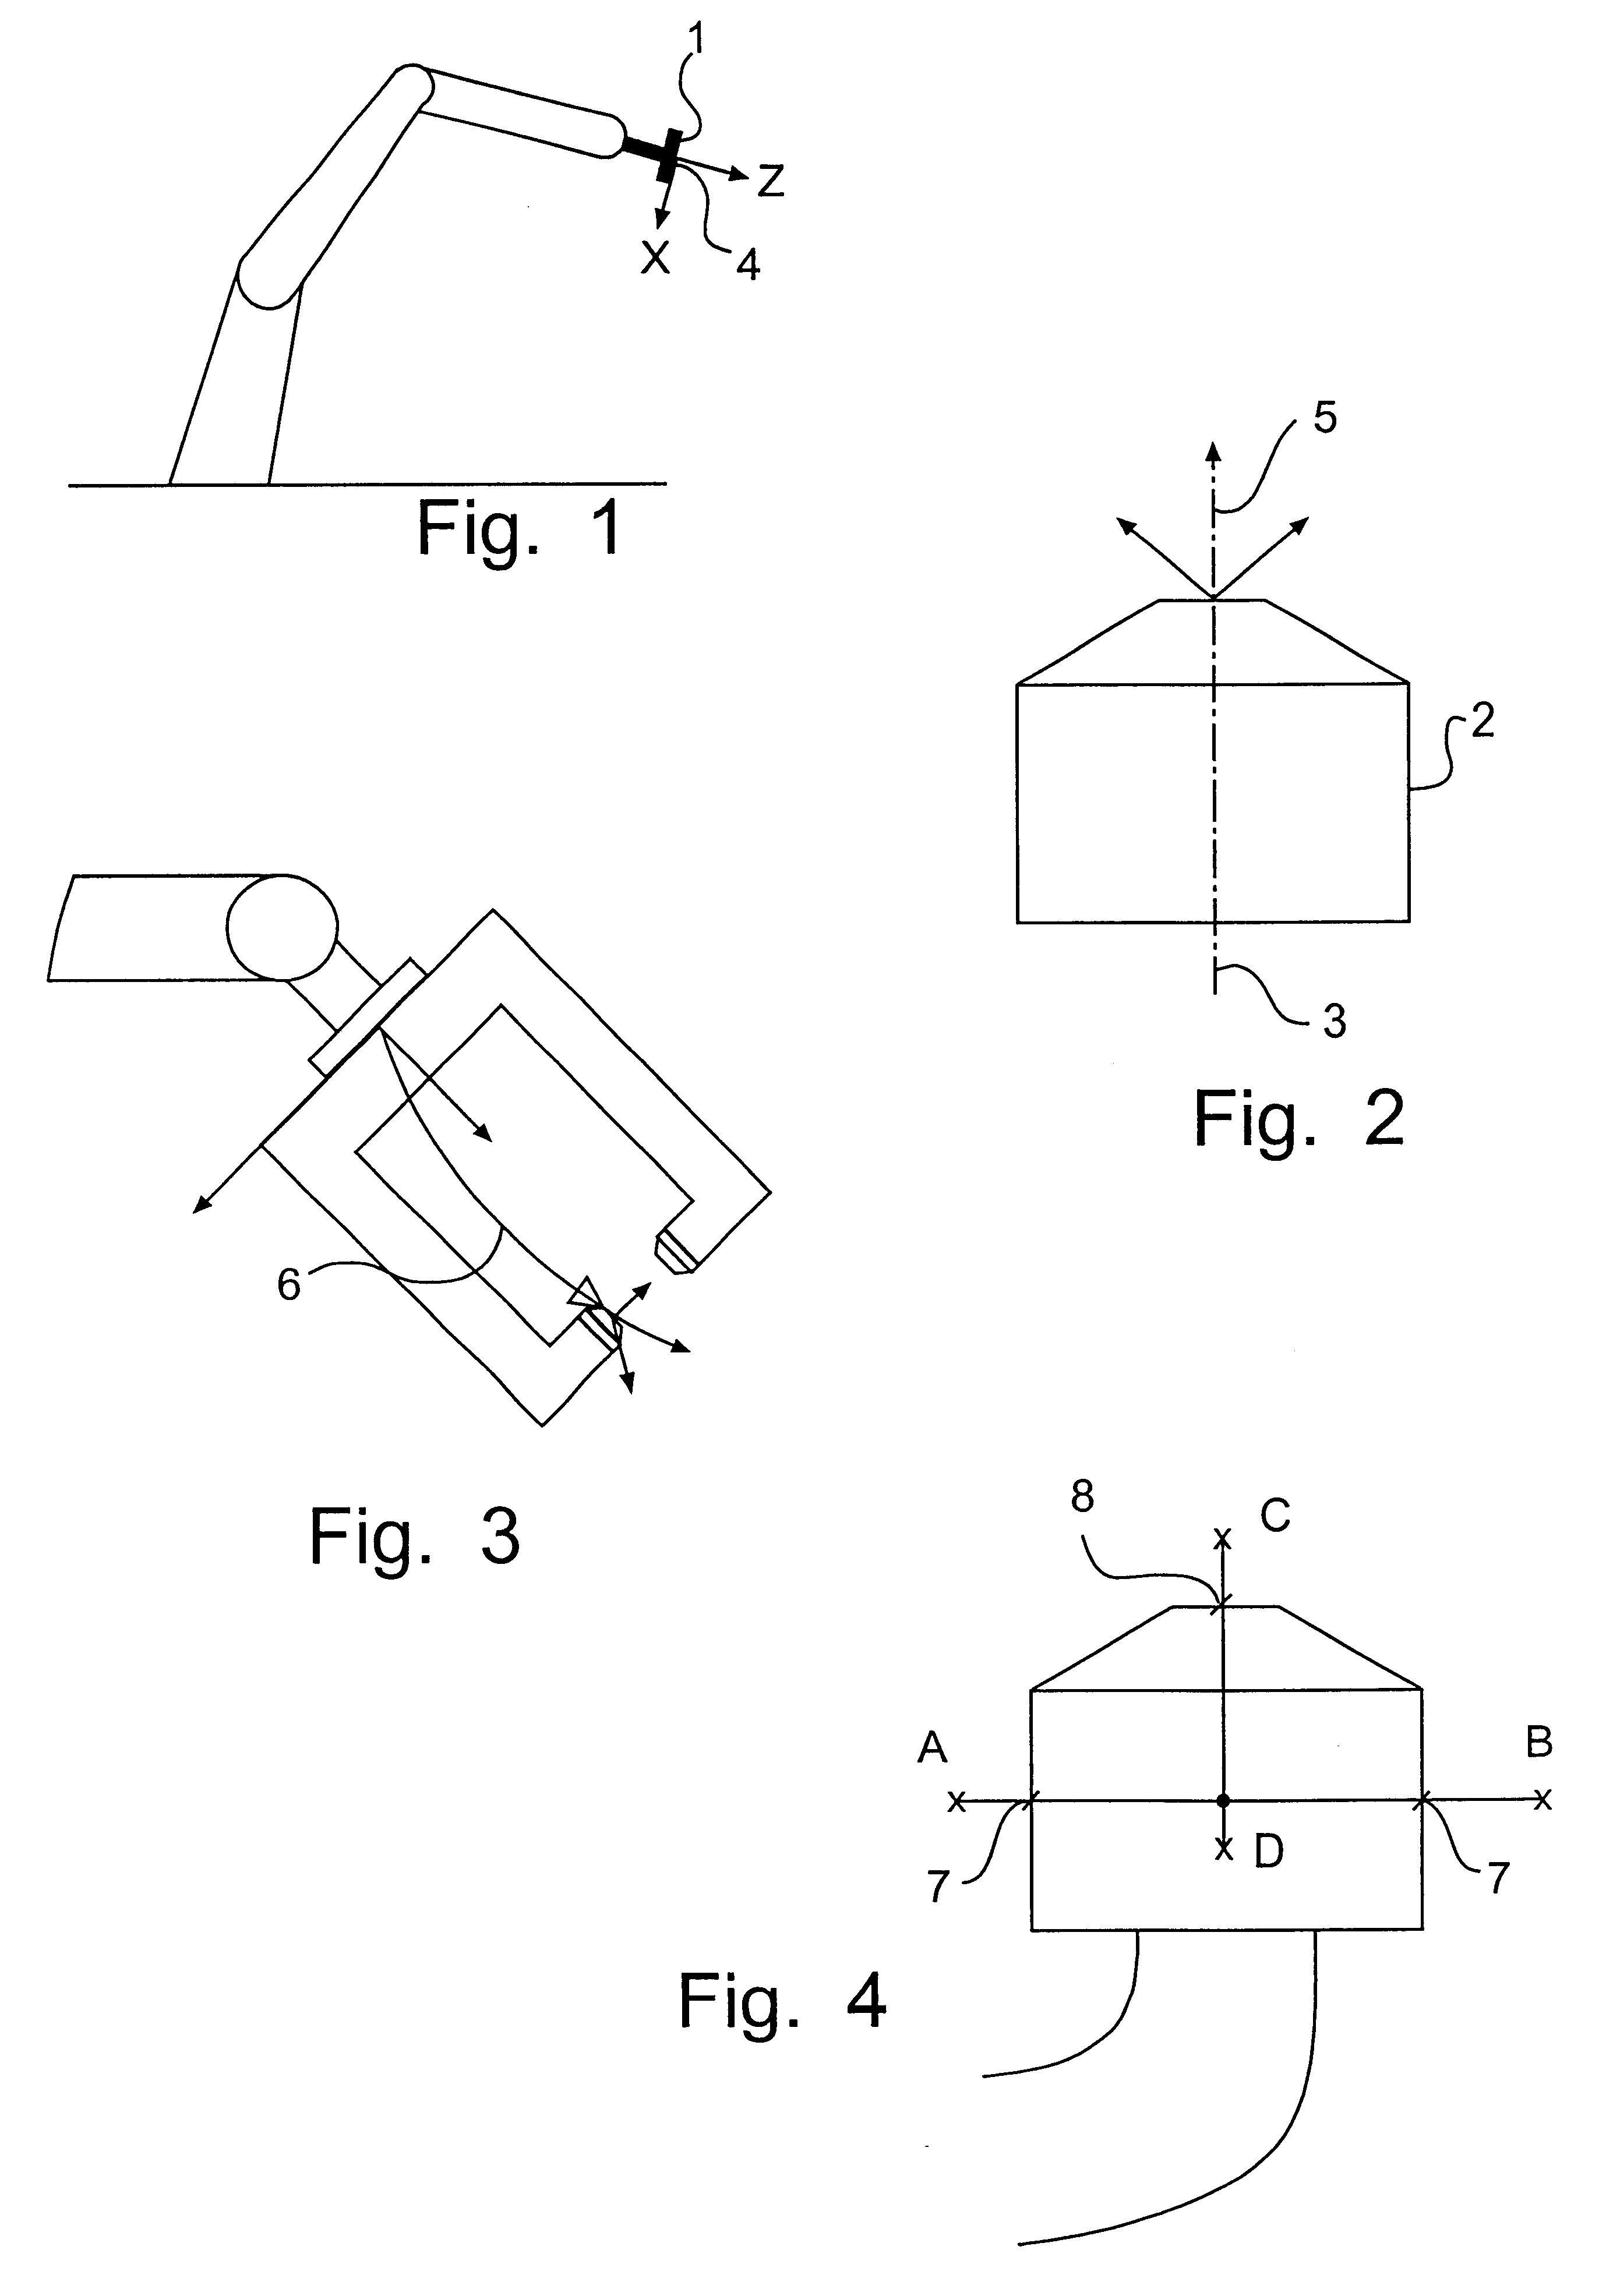 Method for cell alignment and identification and calibration of robot tool